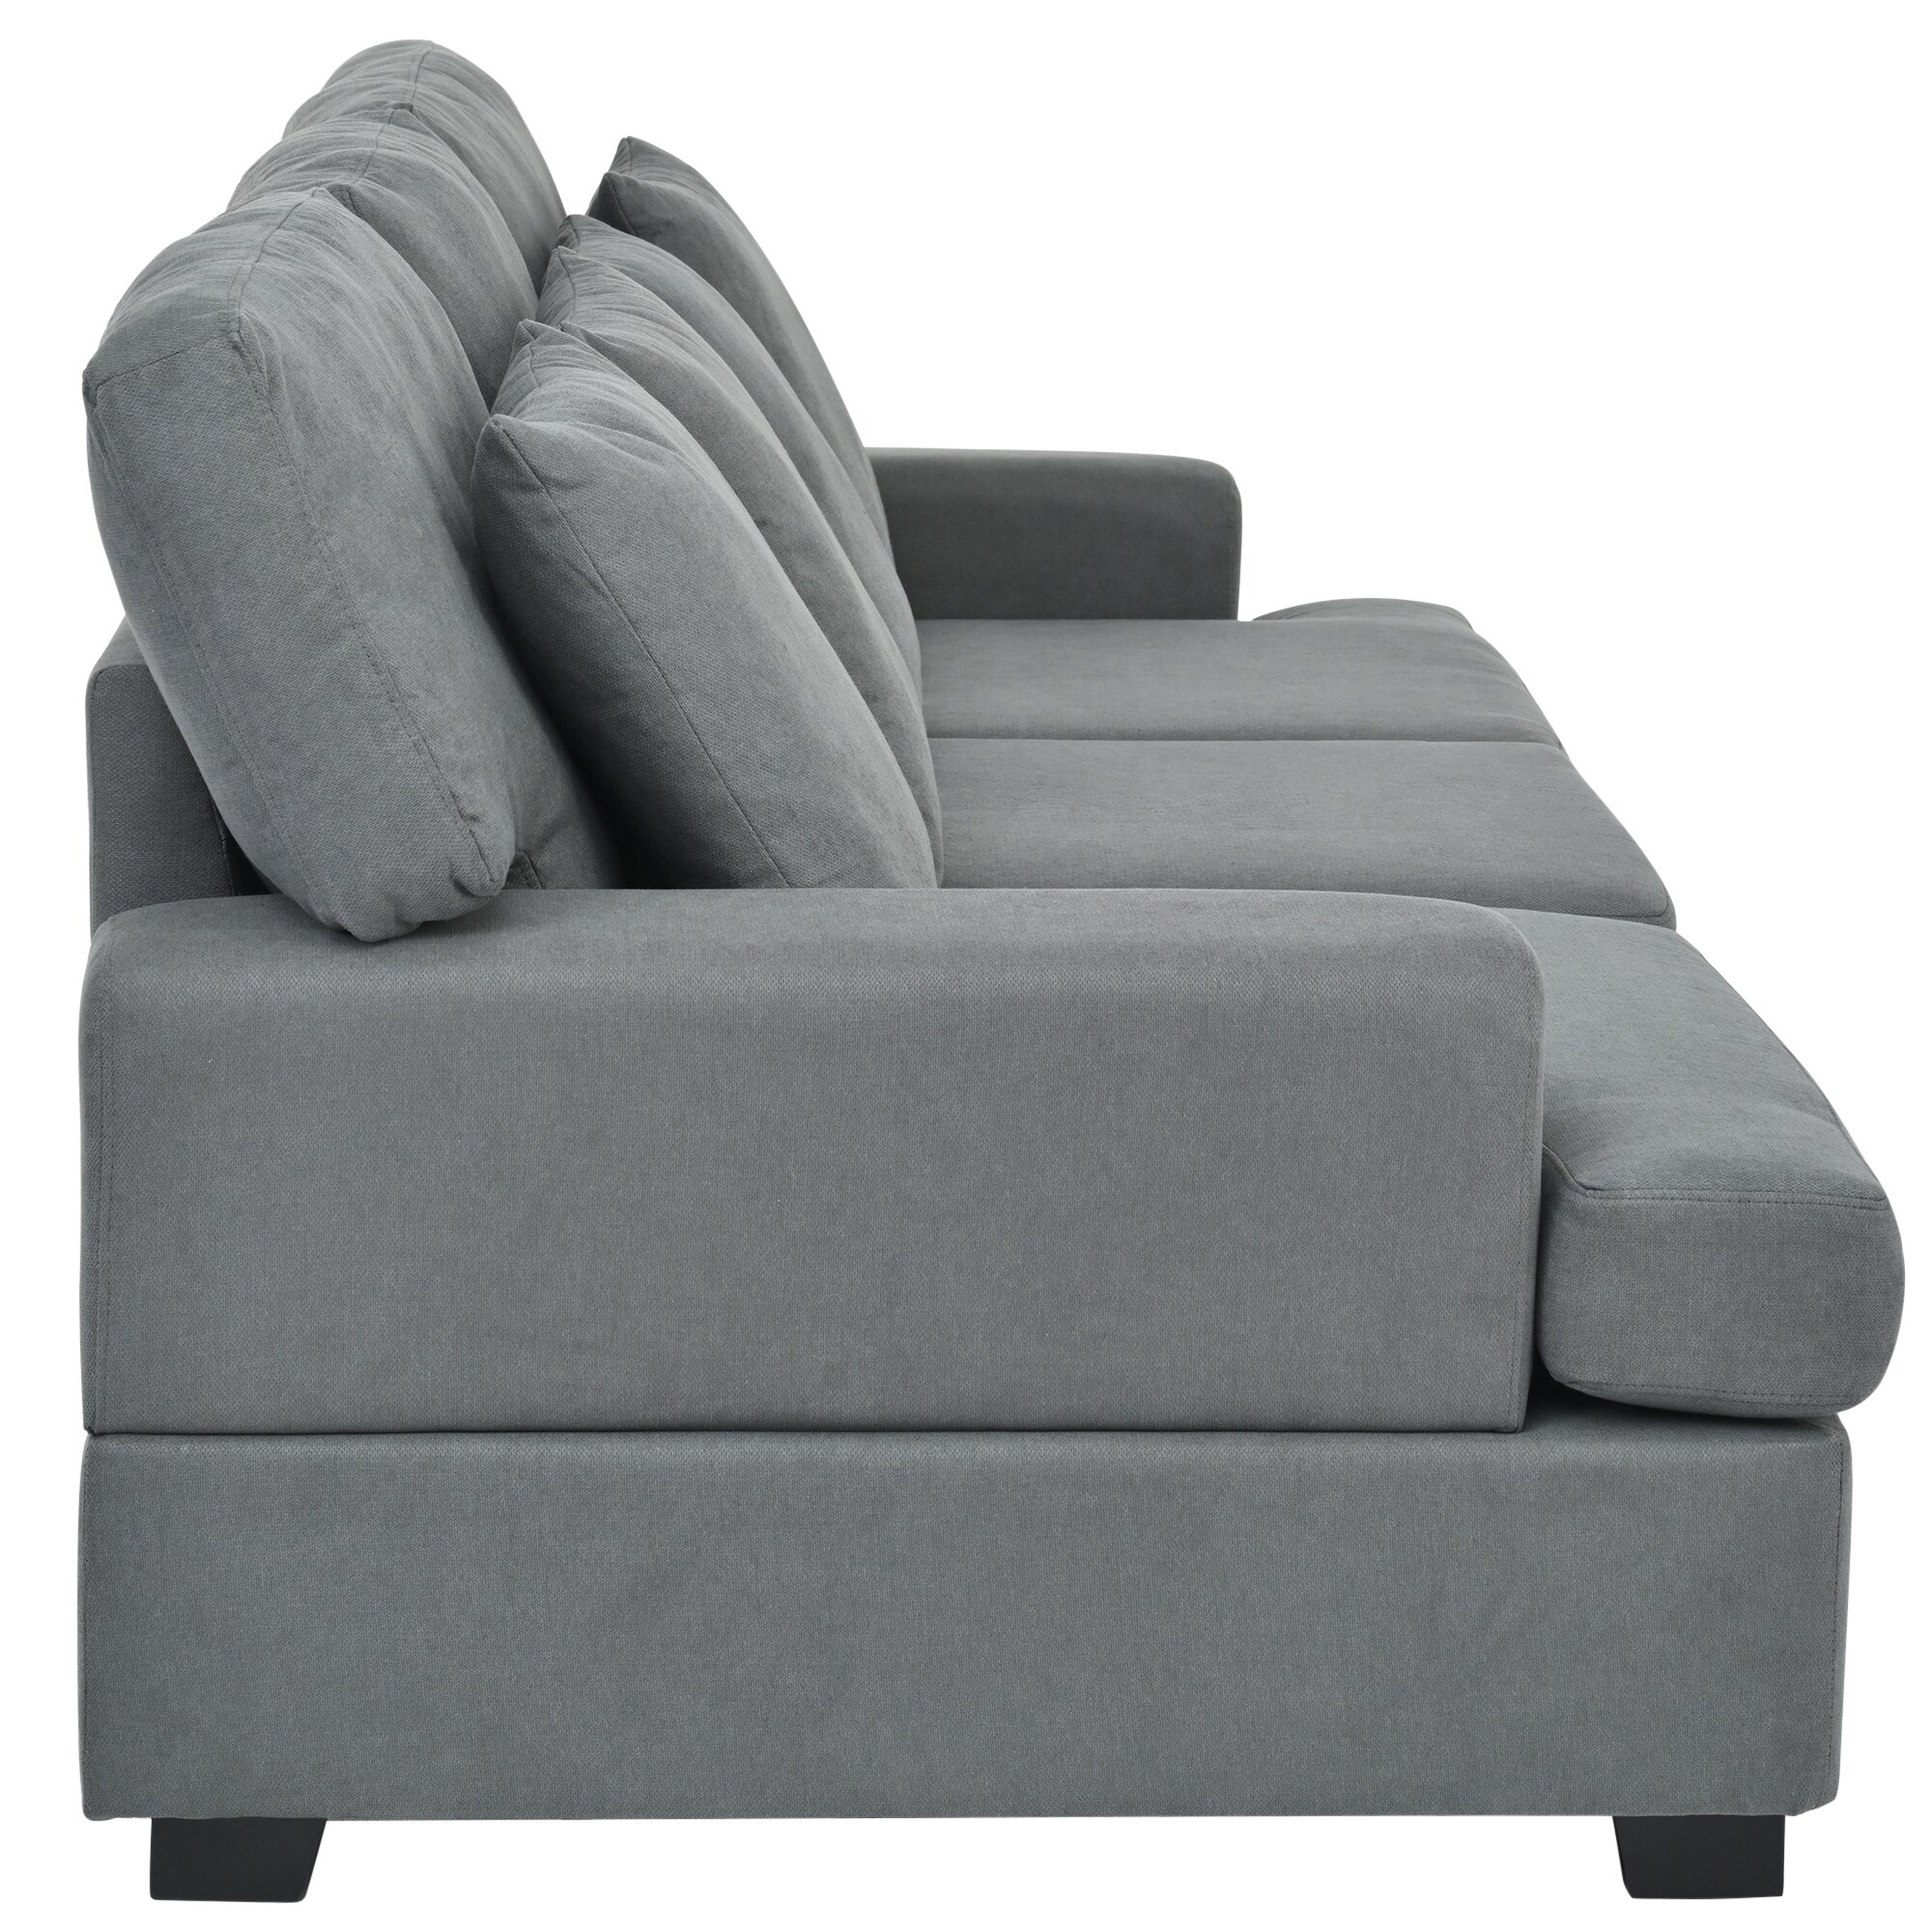 https://ak1.ostkcdn.com/images/products/is/images/direct/528d465c53ca39312eb32fa022ee910c61e4f129/3-Seat-Sofa-with-Removable-Back-and-Seat-Cushions-and-4-Pillows.jpg